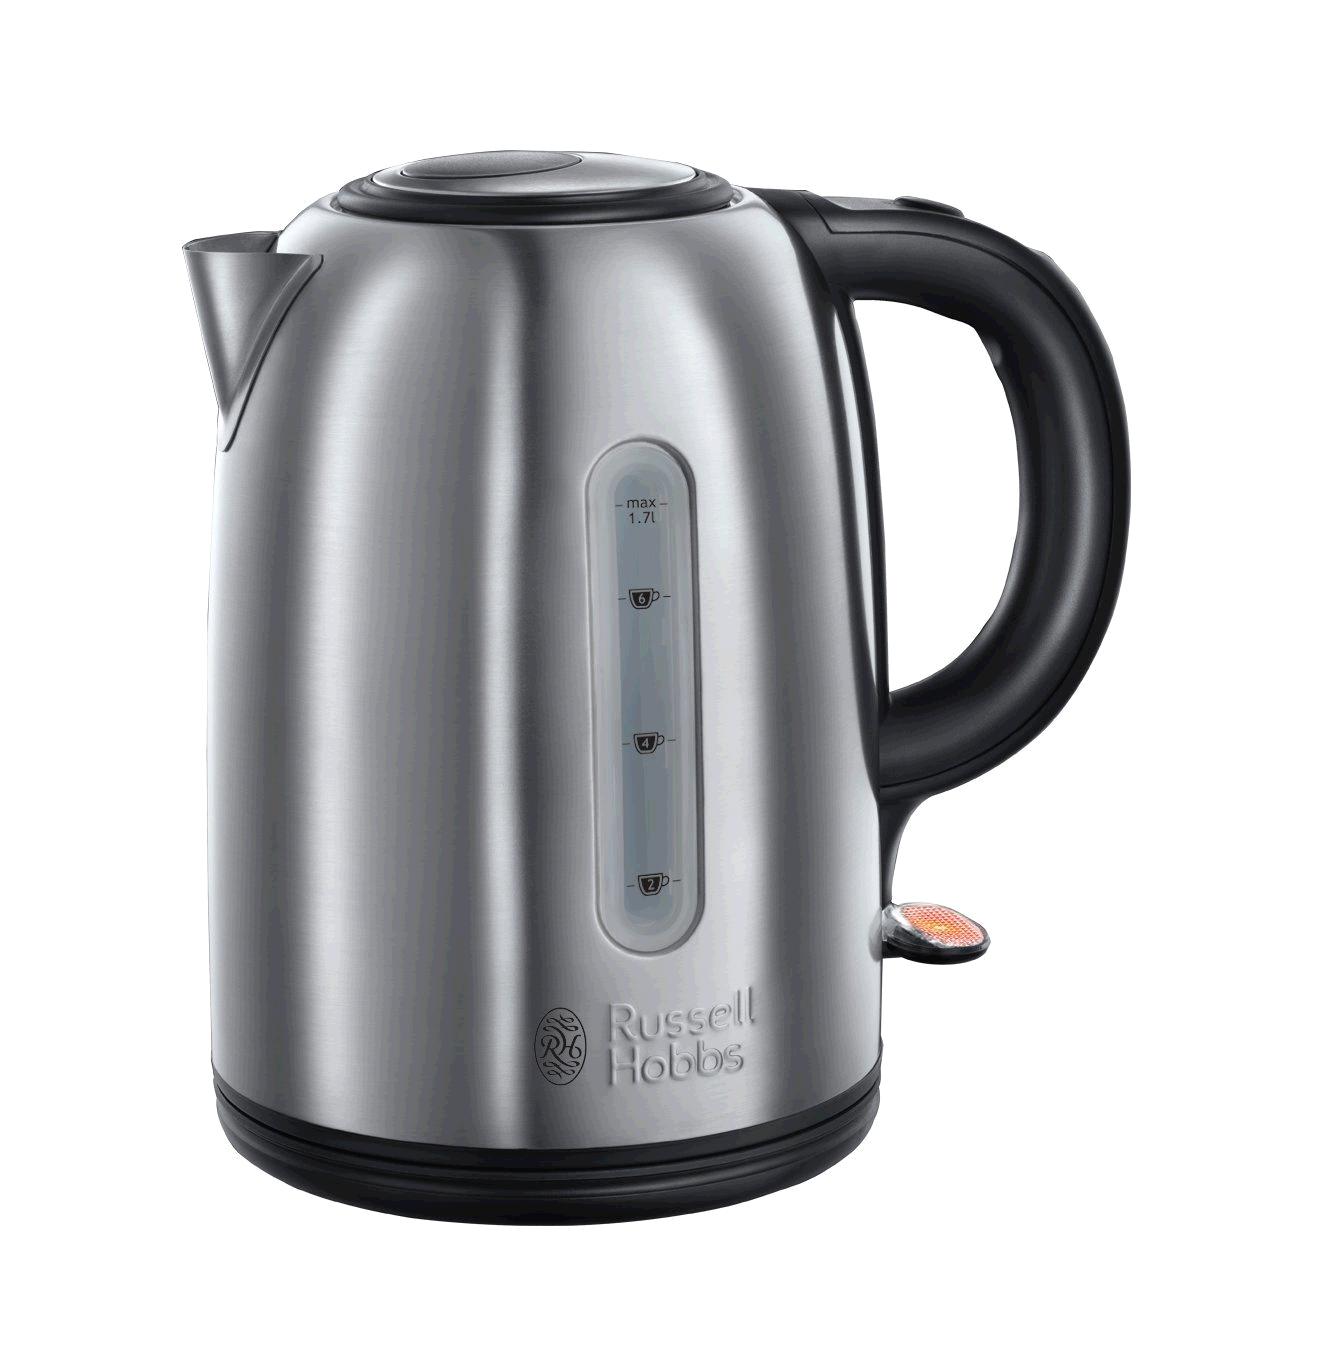 Russell Hobbs Snowdon Kettle Brushed Stainless Steel 1.7ltr 3Kw 